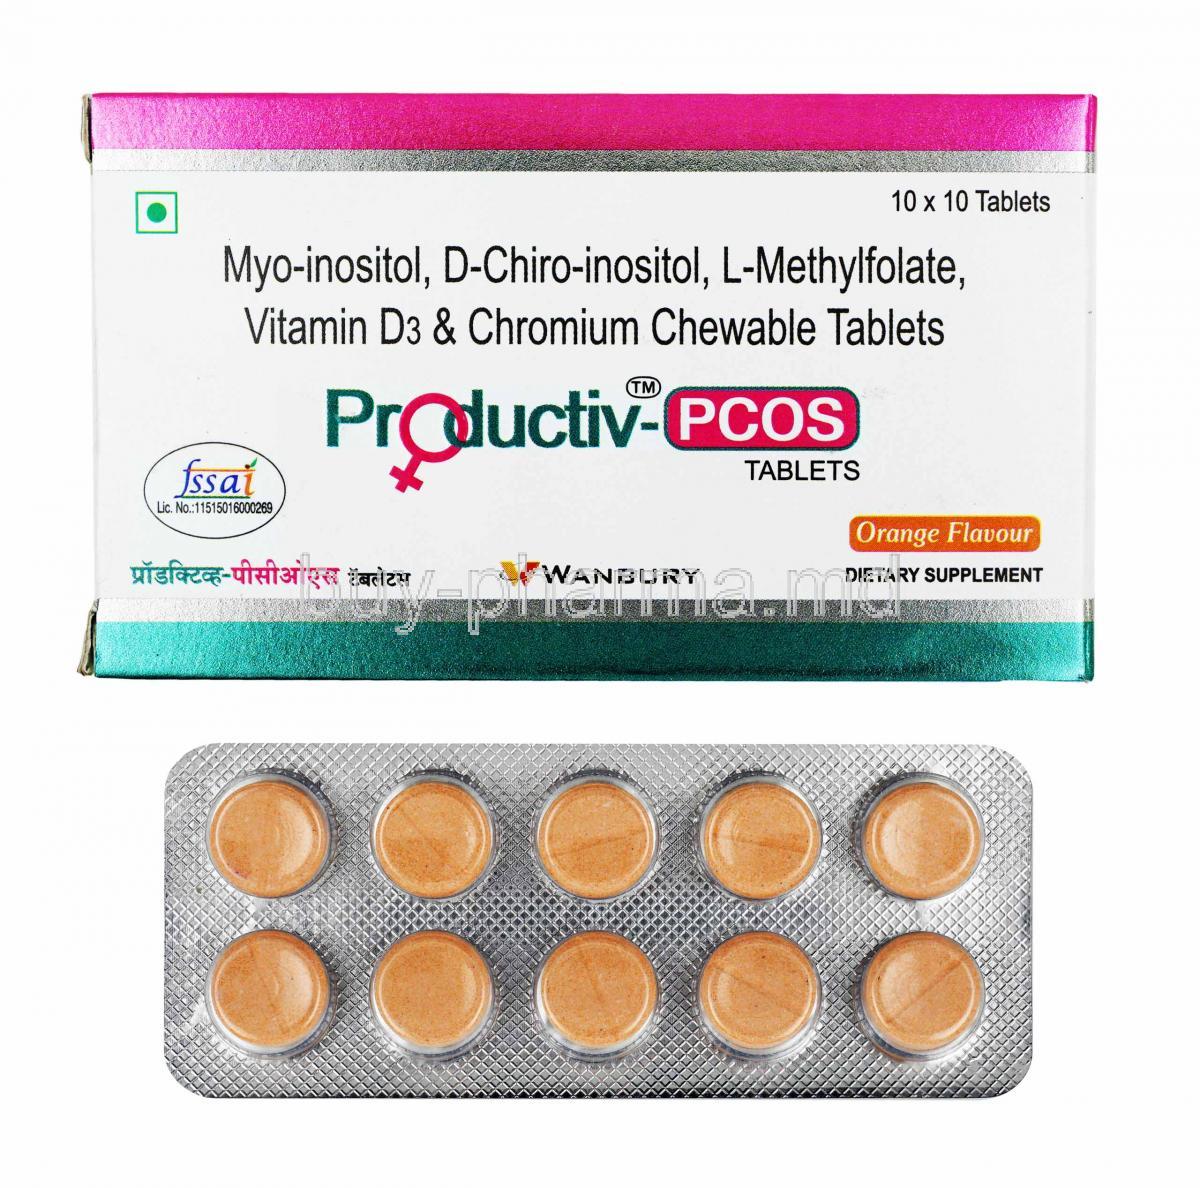 Productiv -PCOS, box and tables